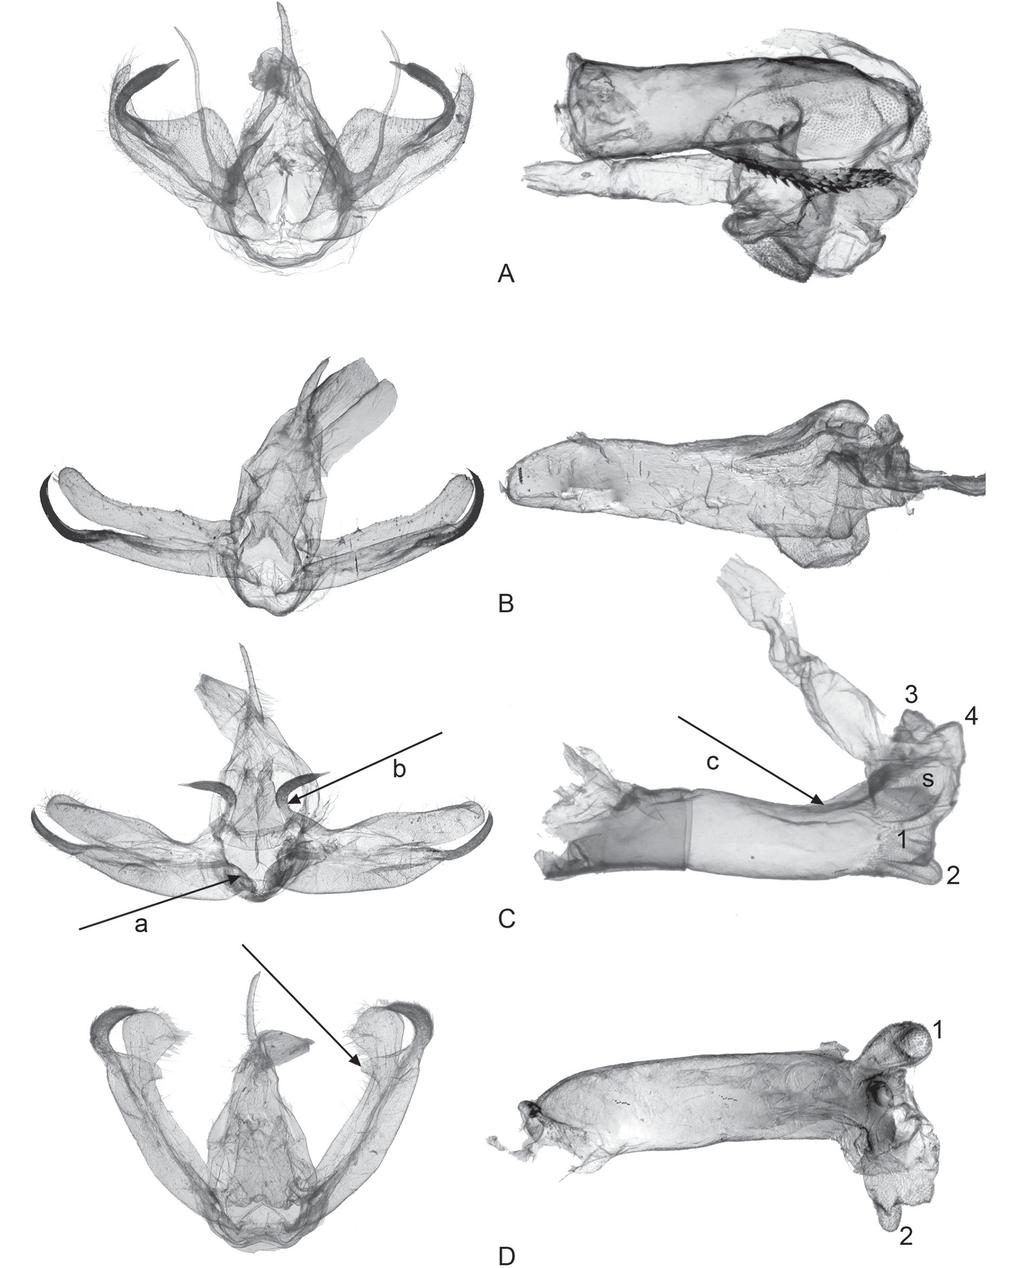 DURANTE A. et al., The genus Nanna in Gabon (Lepidoptera) Fig. 4. Male genitalia. Figures are not in equal proportion; the aedeagus, on the right, is enlarged. A. Nanna ceratopygia Birket-Smith, 1965,, Gabon, Makokou-Ipassa, 500 m, 0 30 43 N 12 48 13 E, 19 Feb.